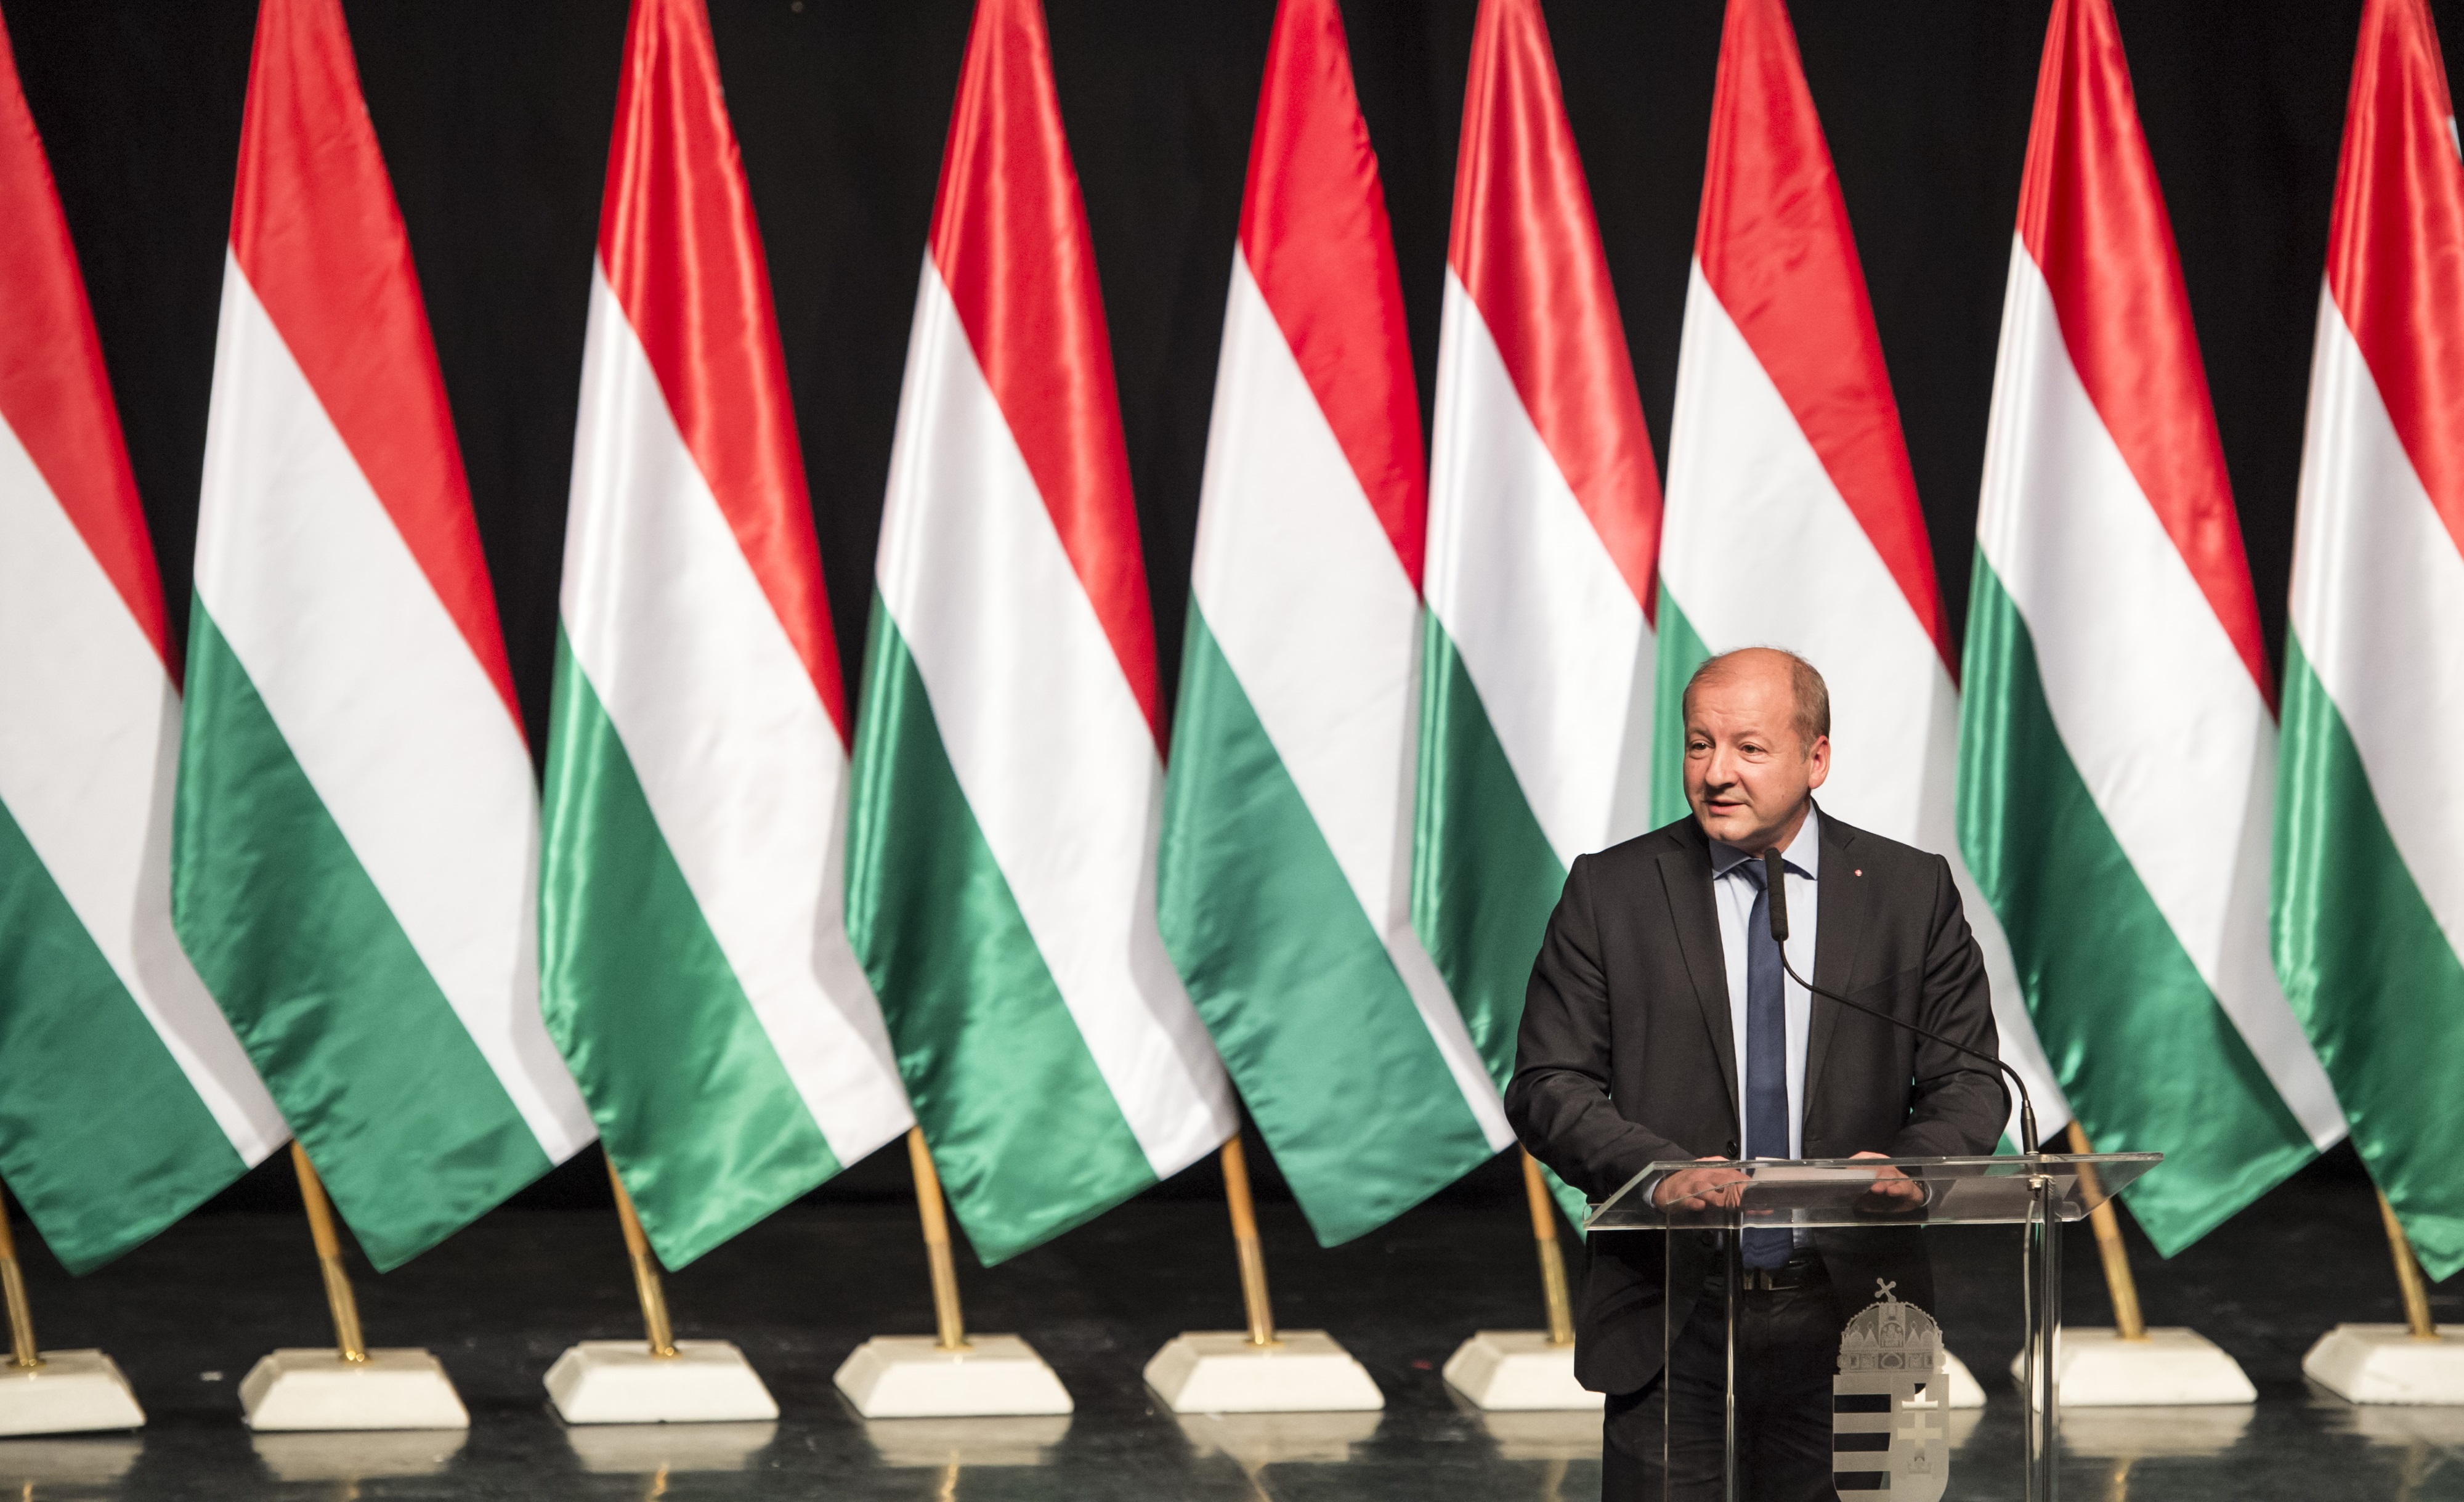 Covert Threats Present The Greatest Challenge In Hungary